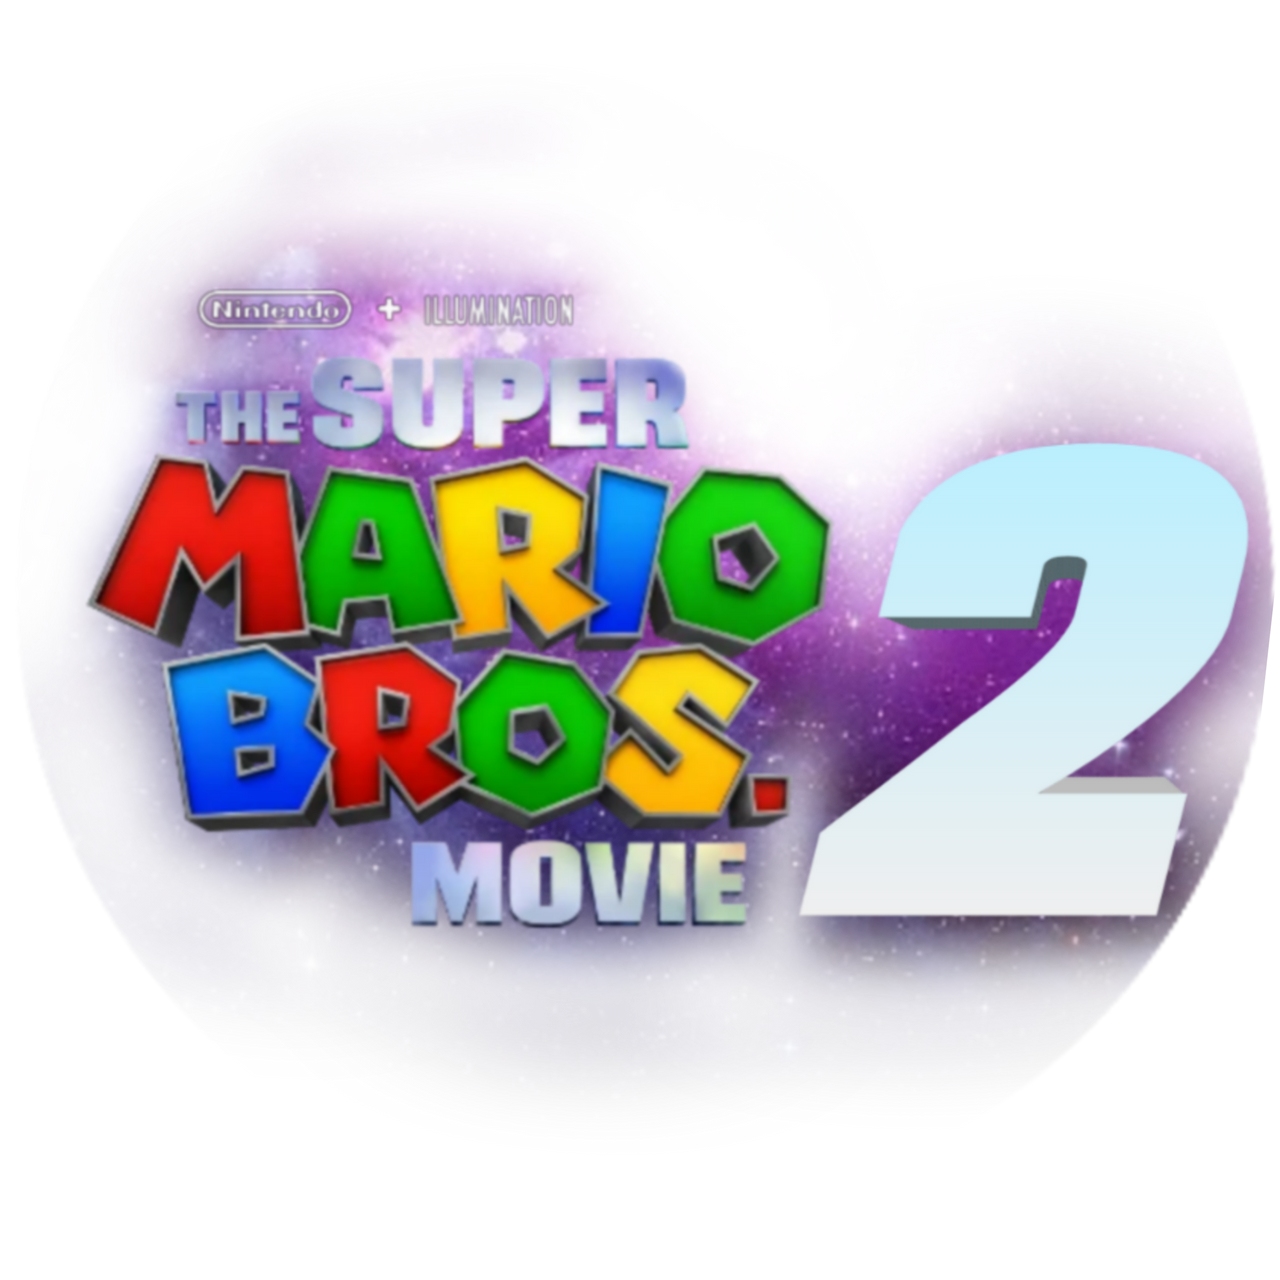 How I think Super Mario Odyssey 2 will be. by SLGQ4 on DeviantArt